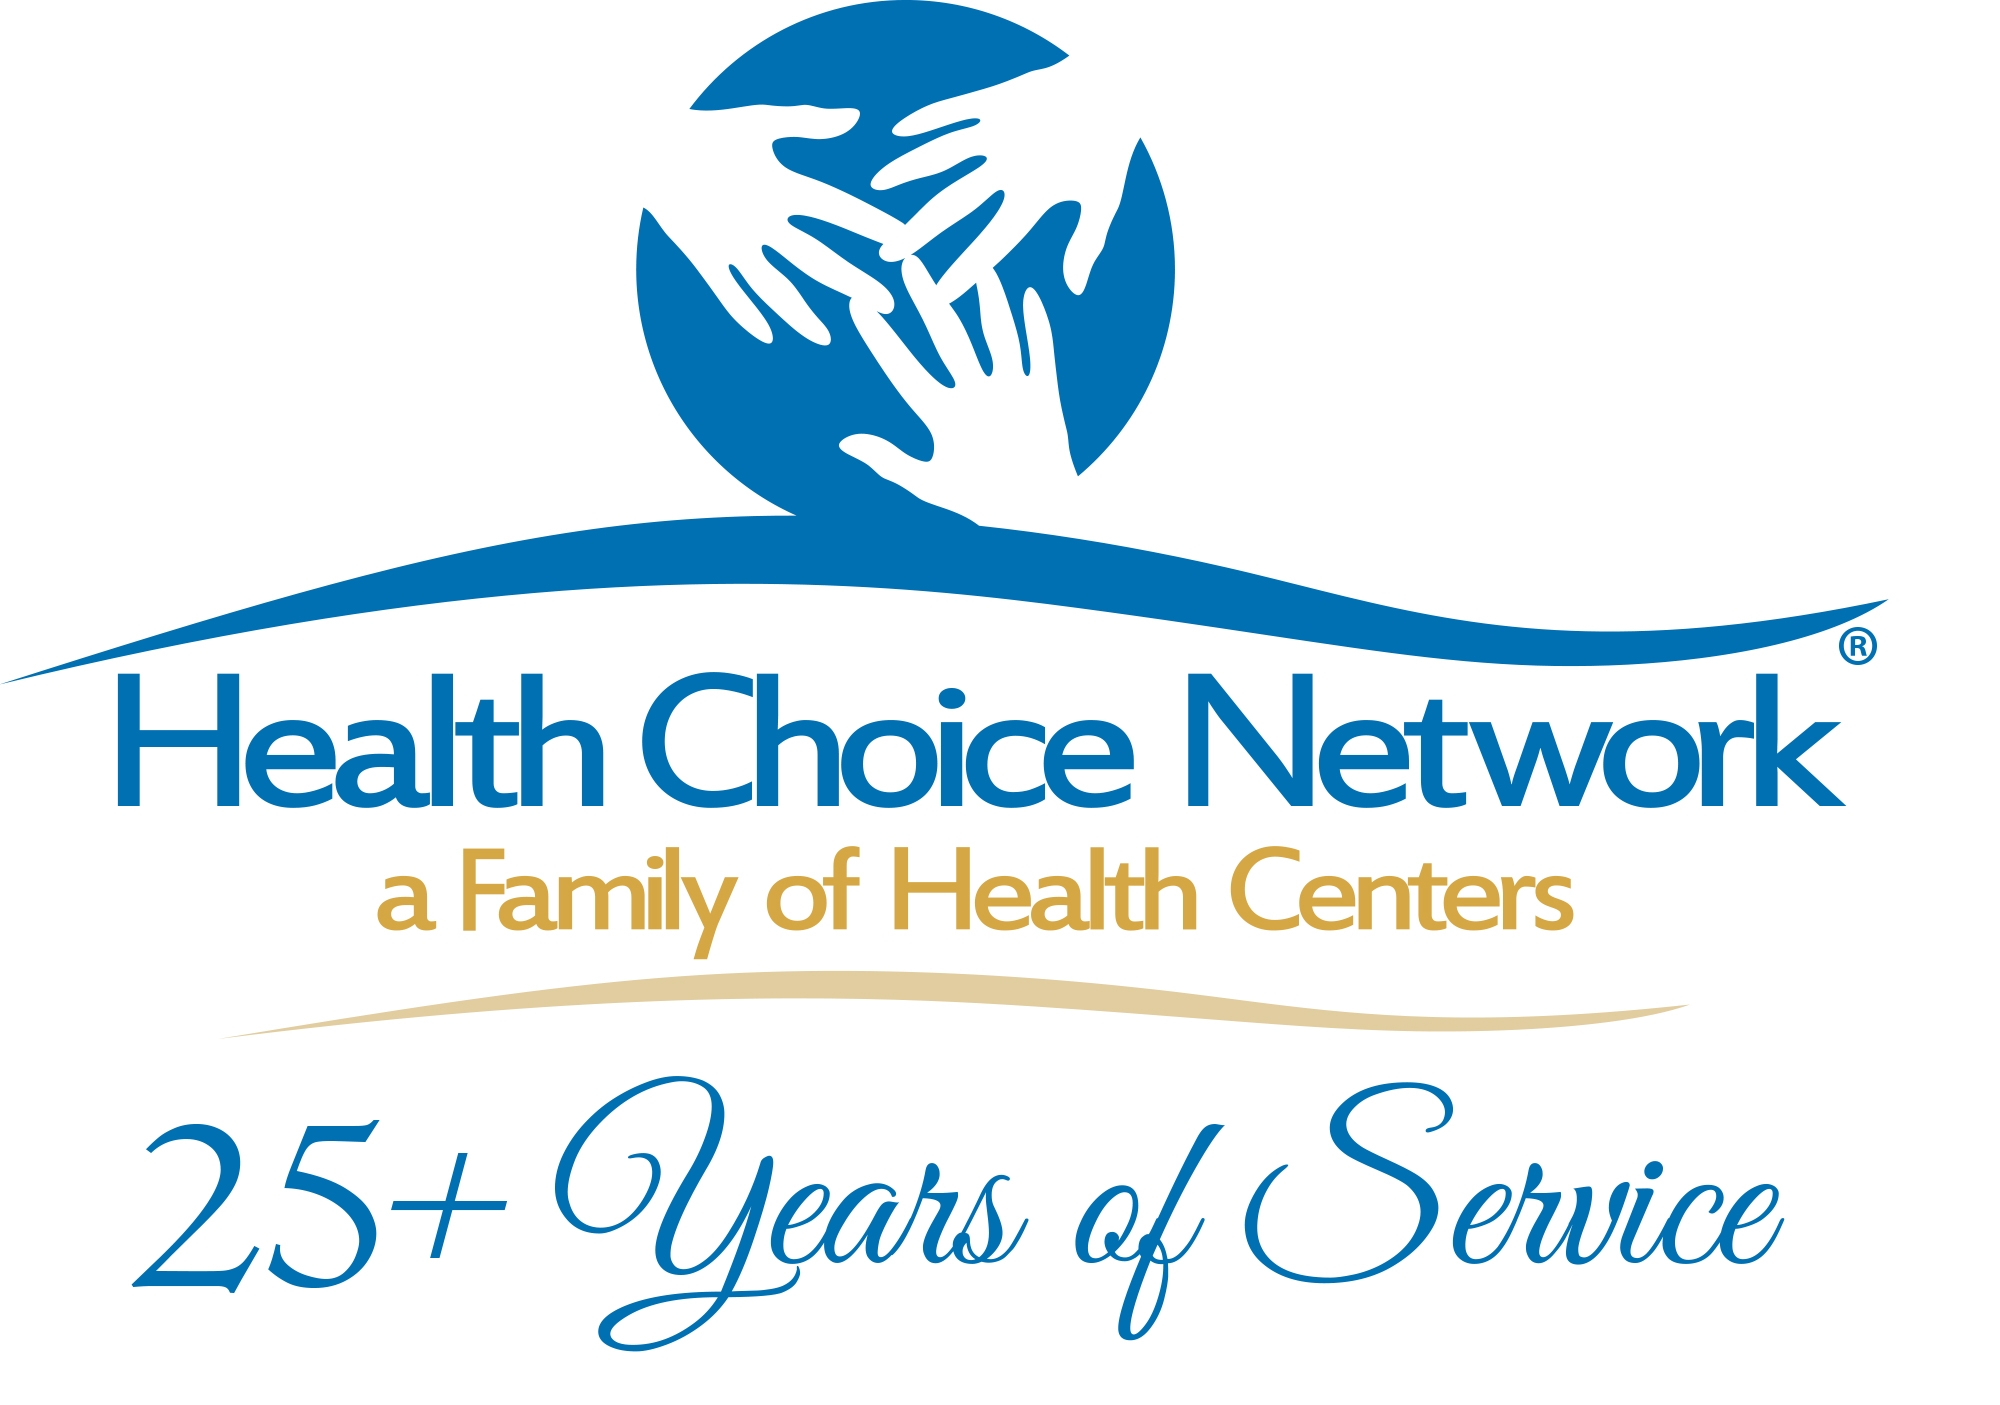 HCN-Logo-with-25-years-of-service.jpg